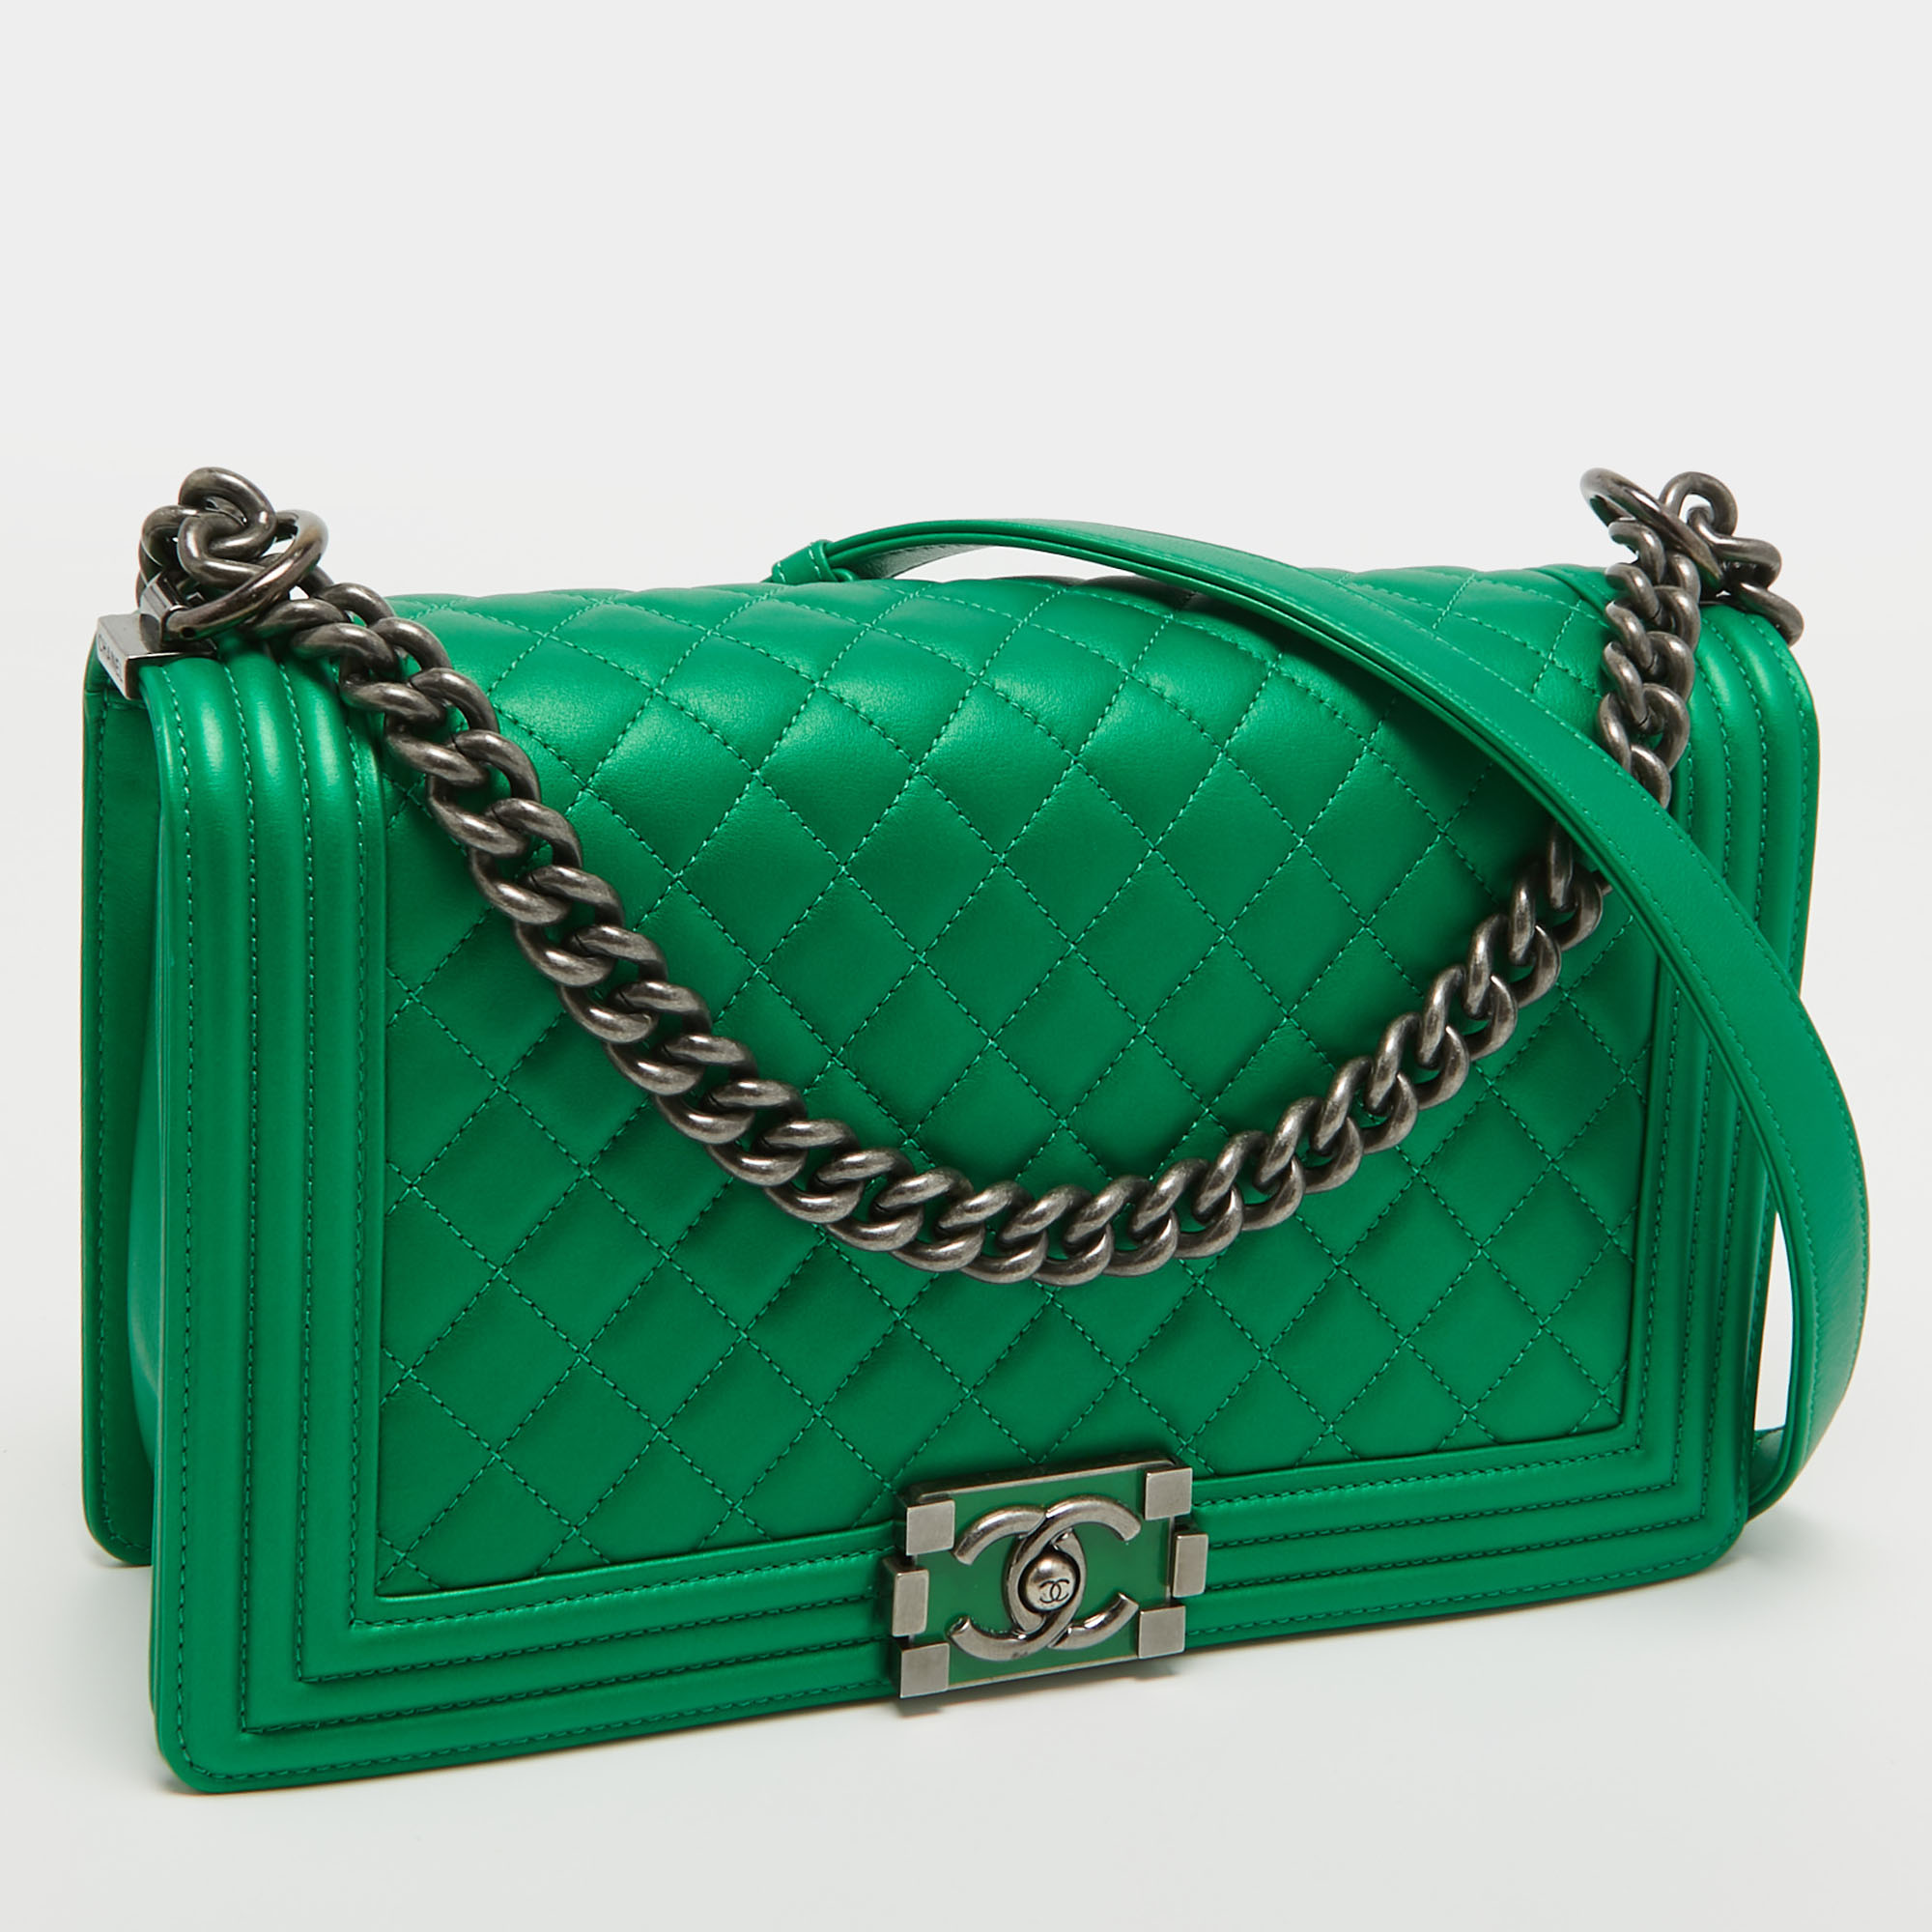 Chanel Metallic Green Quilted Leather New Medium Boy Bag